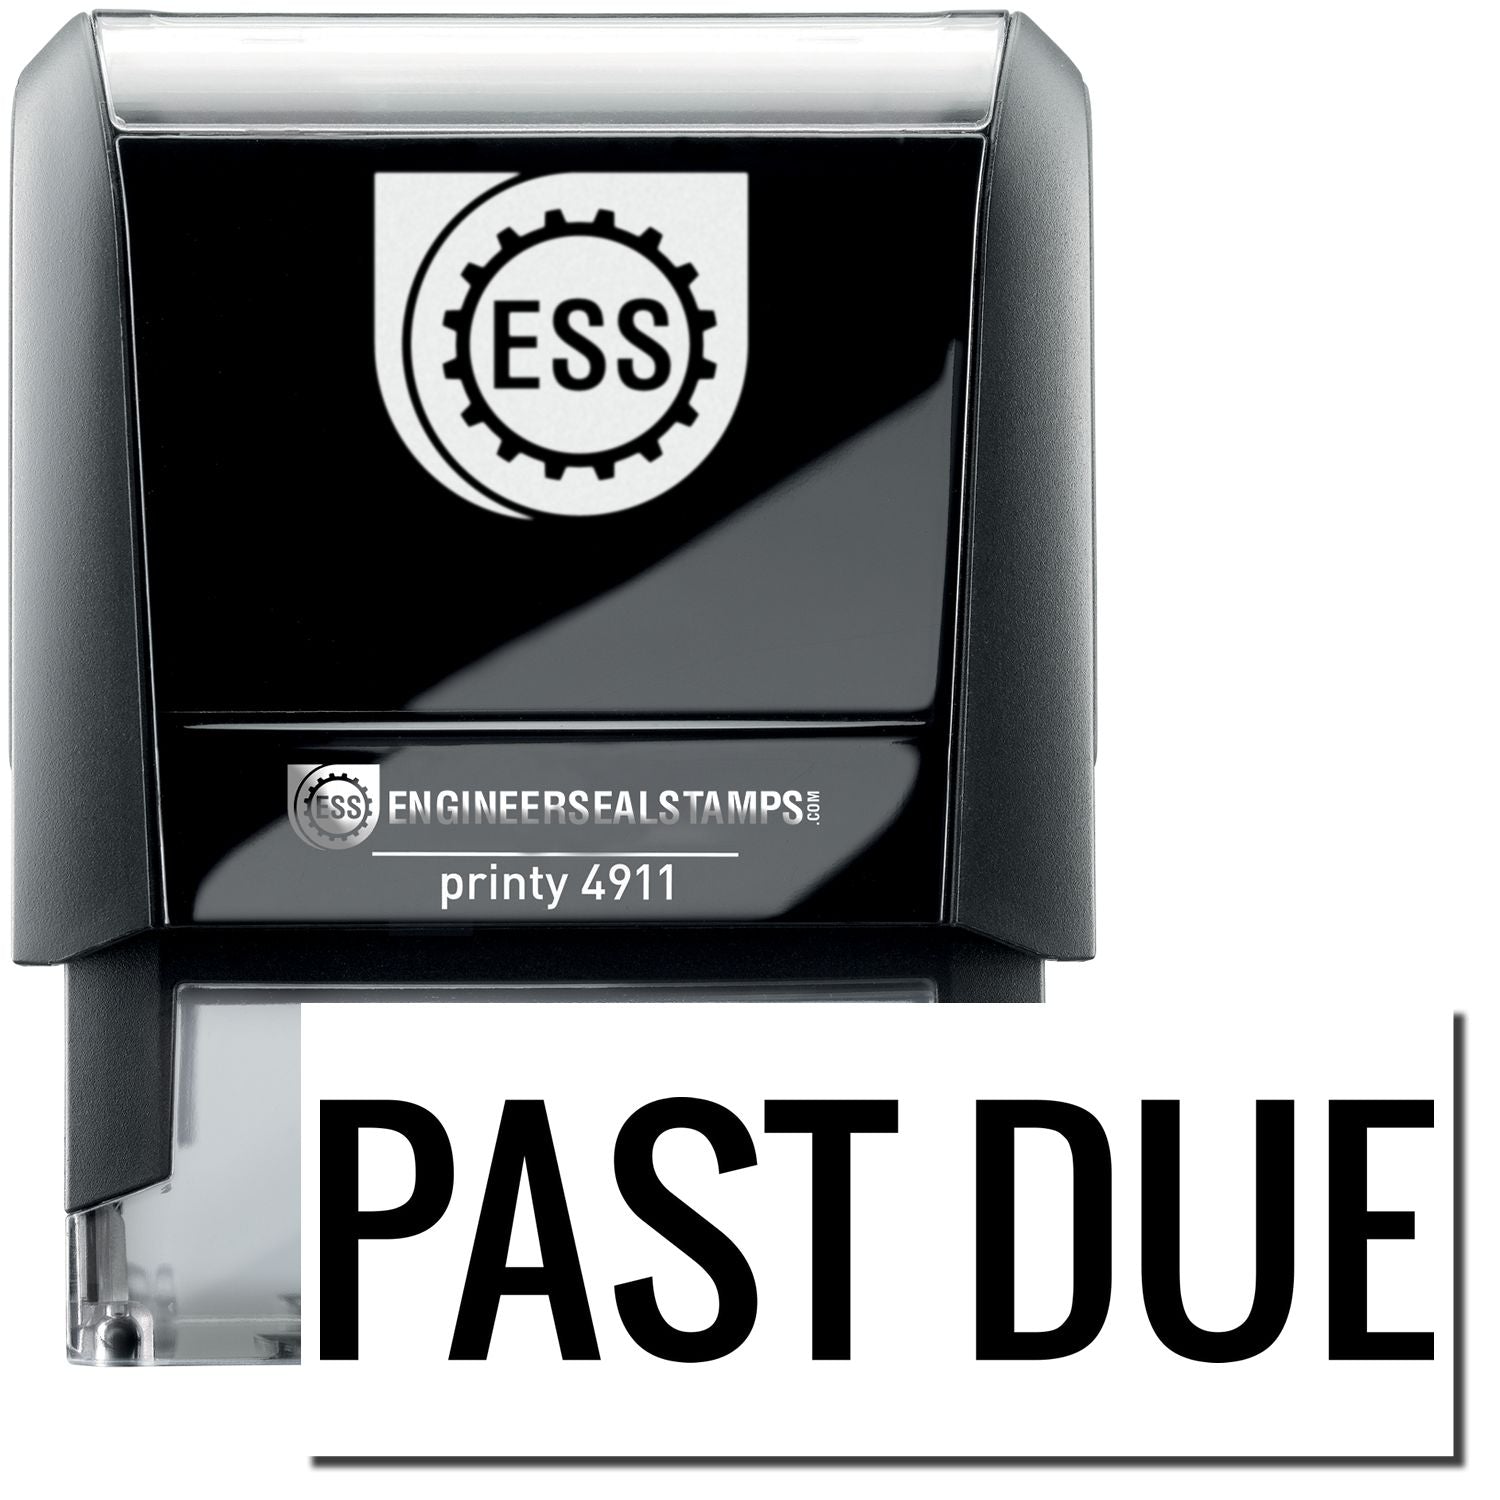 A self-inking stamp with a stamped image showing how the text "PAST DUE" in a narrow bold font is displayed after stamping.